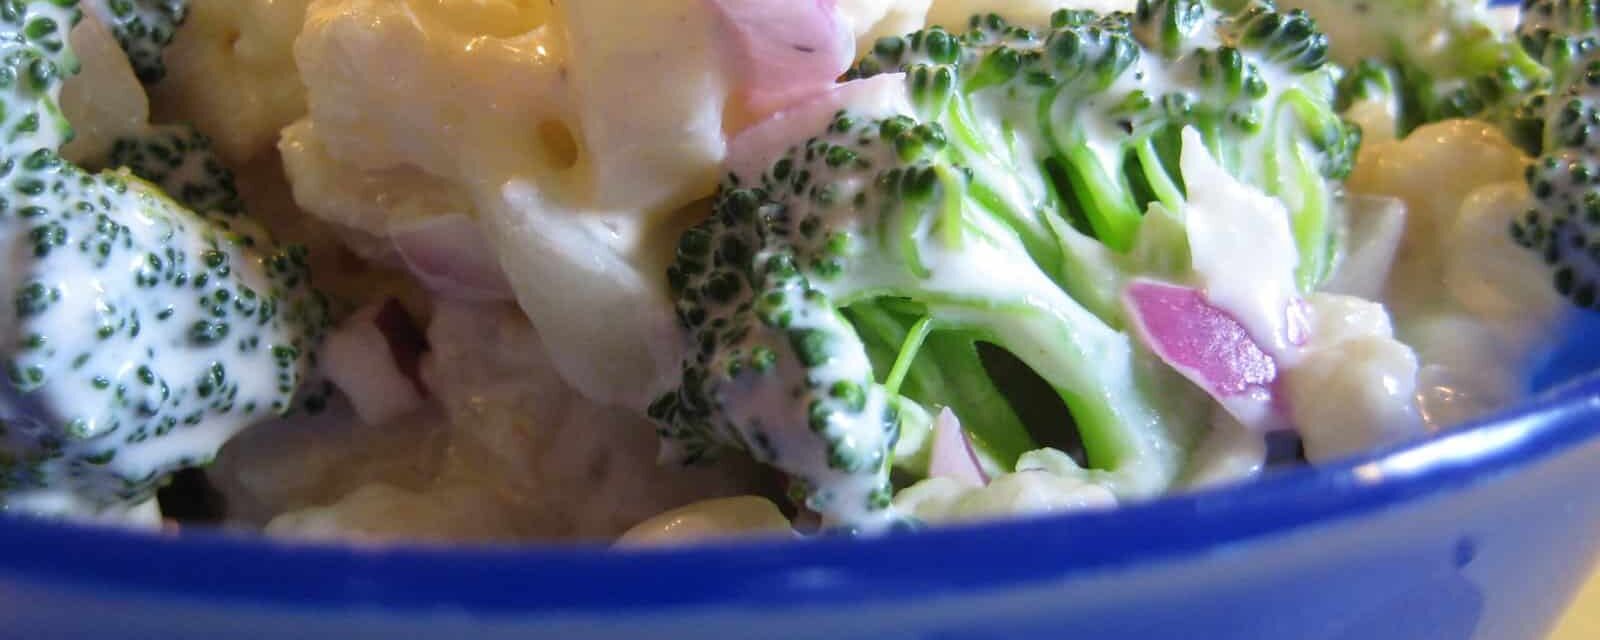 CARE Recipe: Creamy Cauliflower and Broccoli Salad (Great Brassica Side with Grilled Protein)